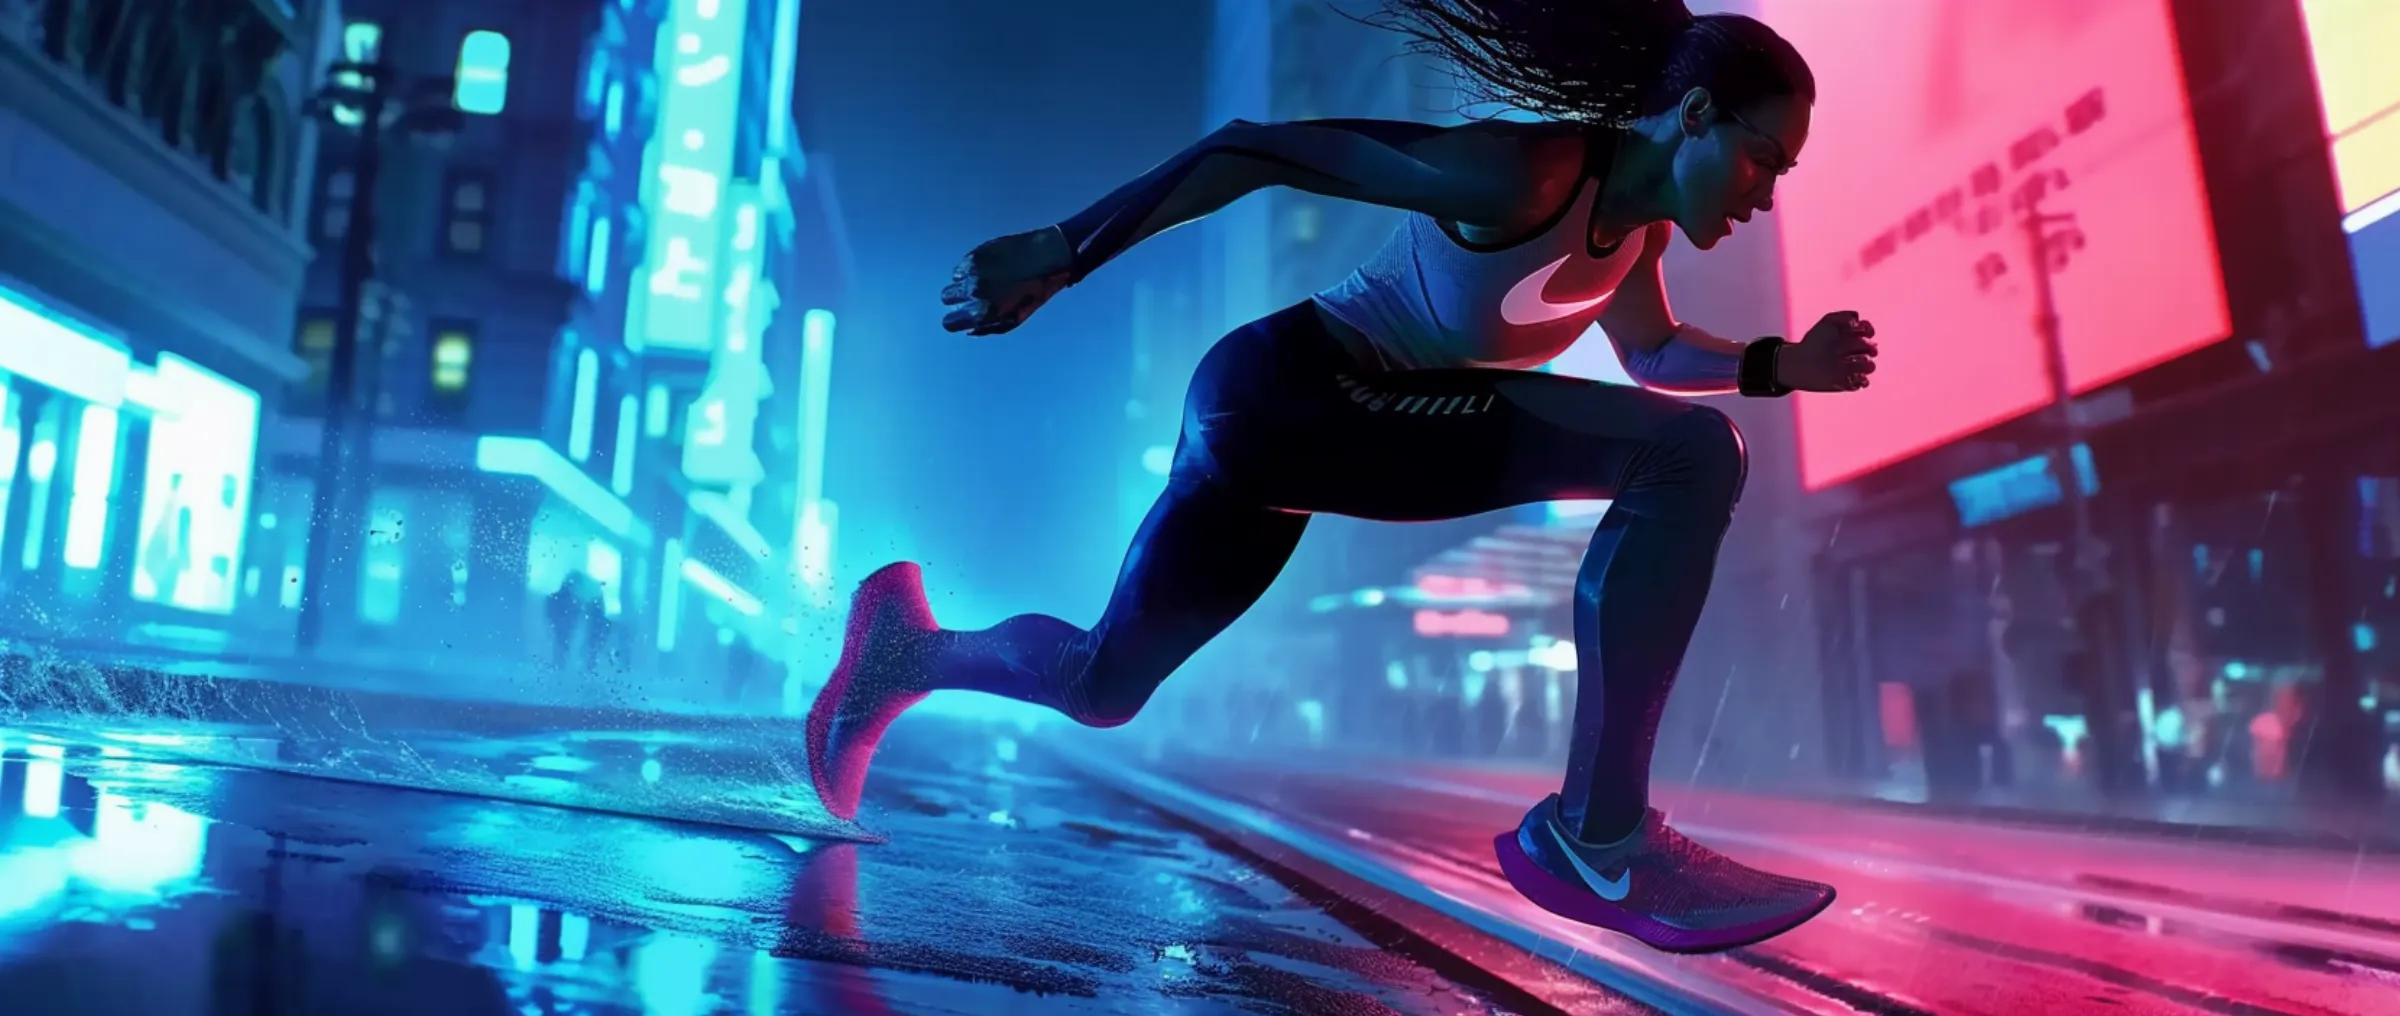 Nike is entering the world of video games and exploring the NFT space